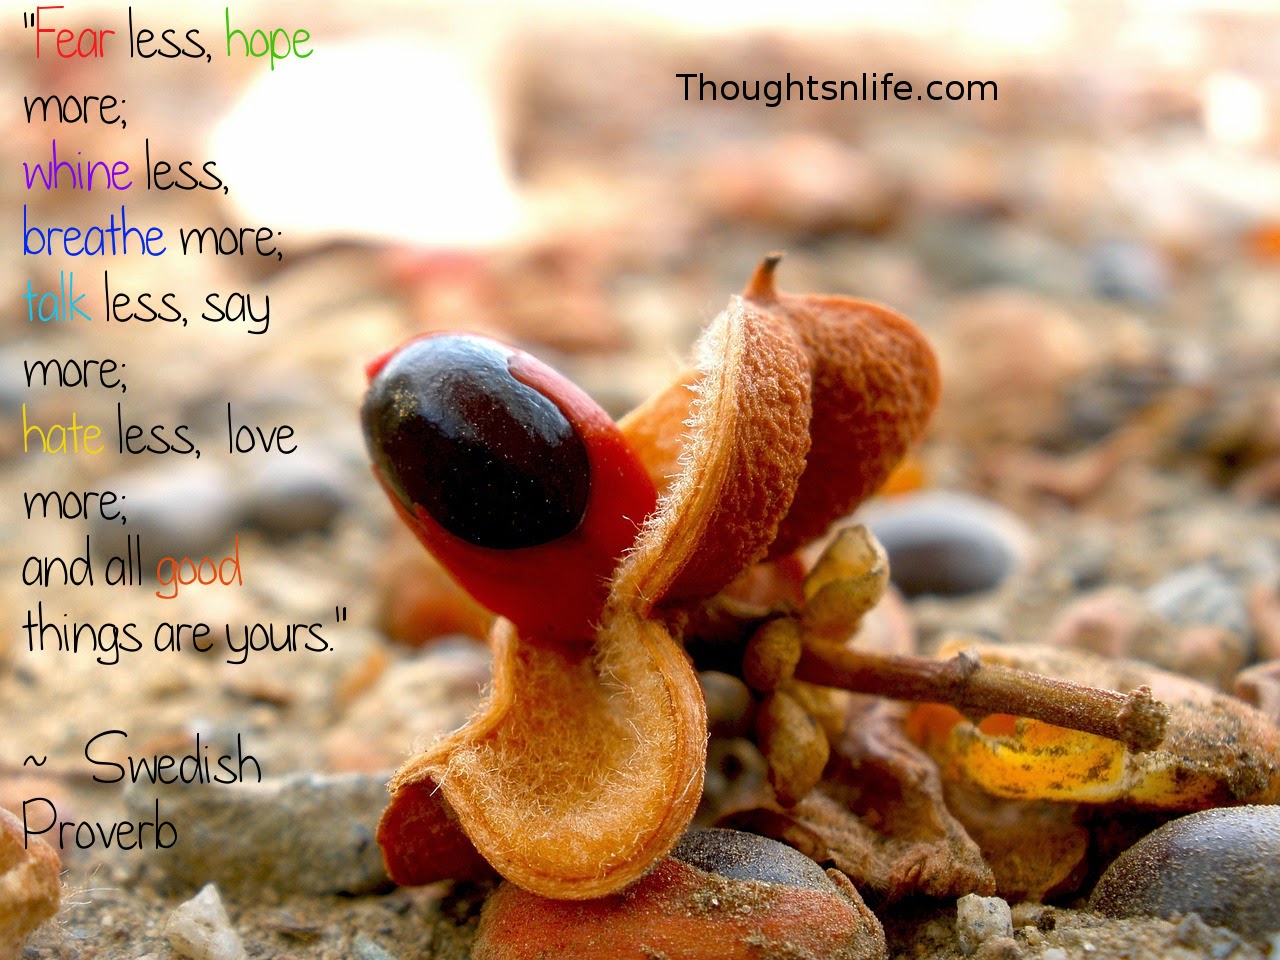 Thoughtsnlife.com:"Fear less, hope more;  whine less, breathe more;  talk less, say more;  hate less,  love more;  and all good things are yours."  ~   Swedish Proverb